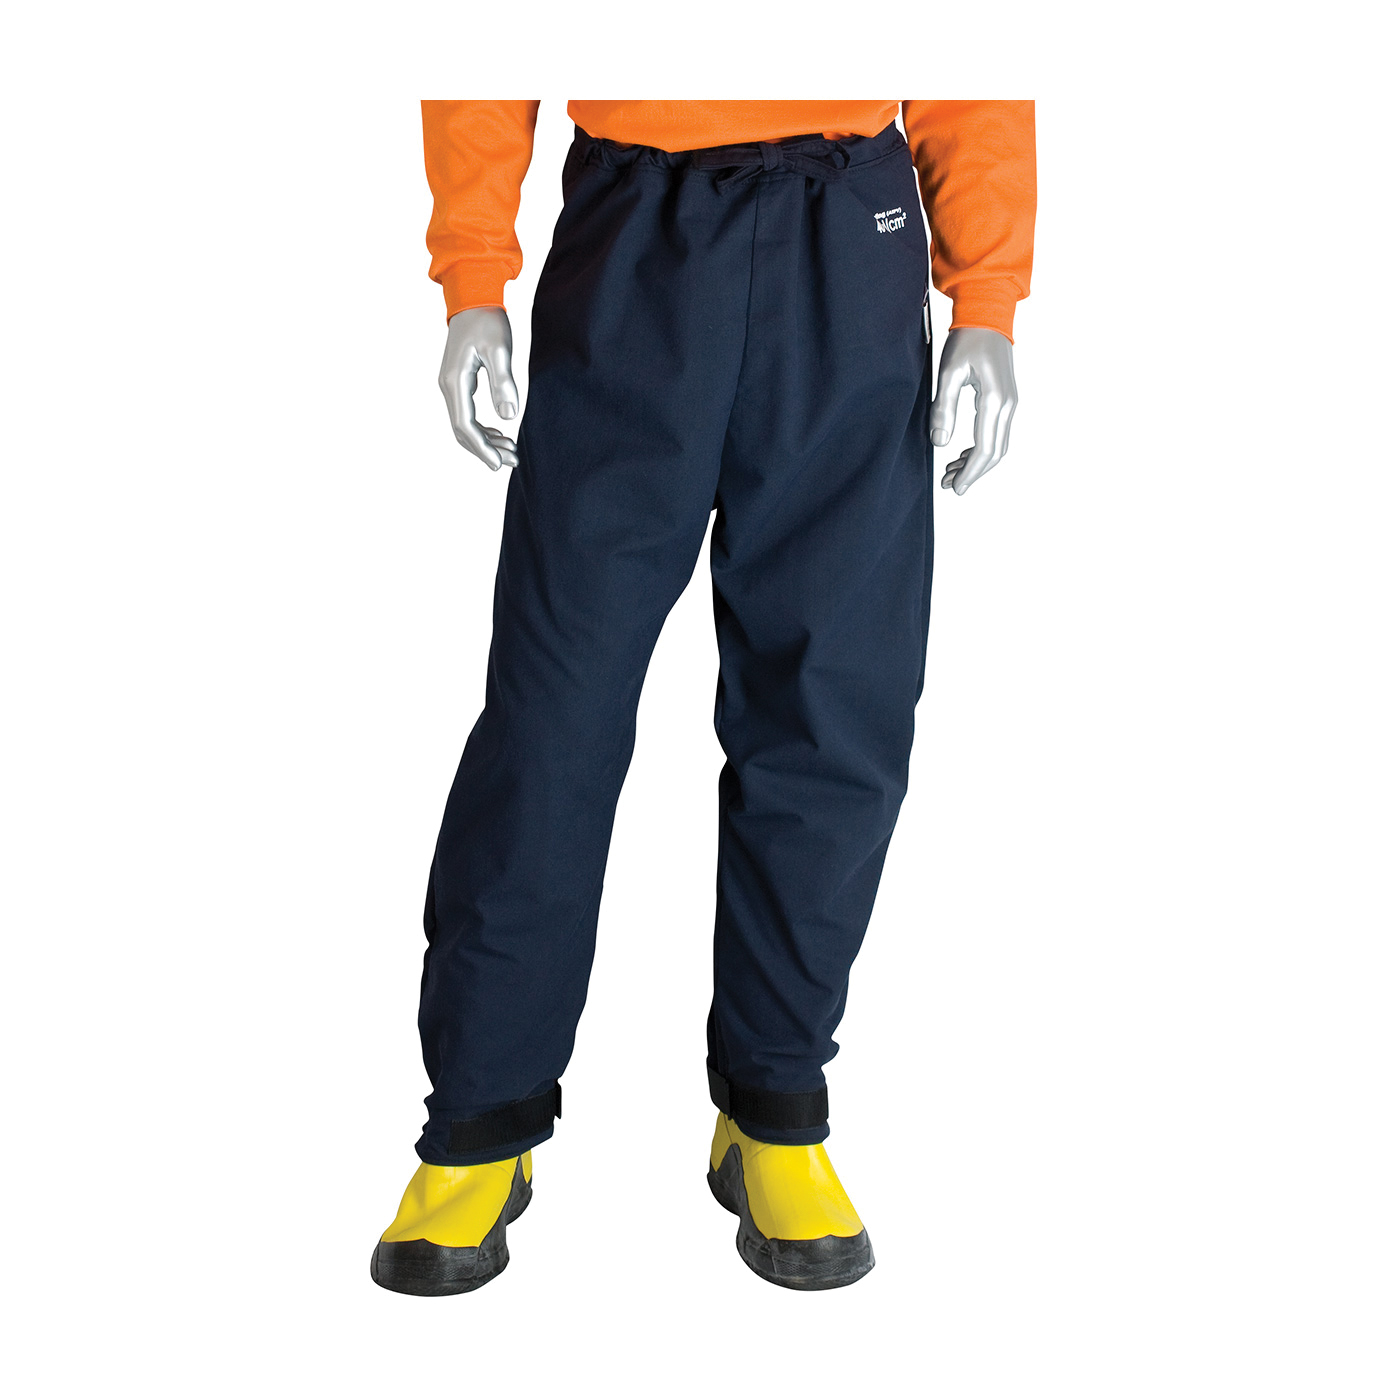 PIP® 9100-530ULT/XL 9100-530ULT Ultralight Flame Resistant Pant, 44 to 46 in Waist, 32 in L Inseam, Navy Blue, DuPont™ Protera®/Westex® UltraSoft® Interlock Knit